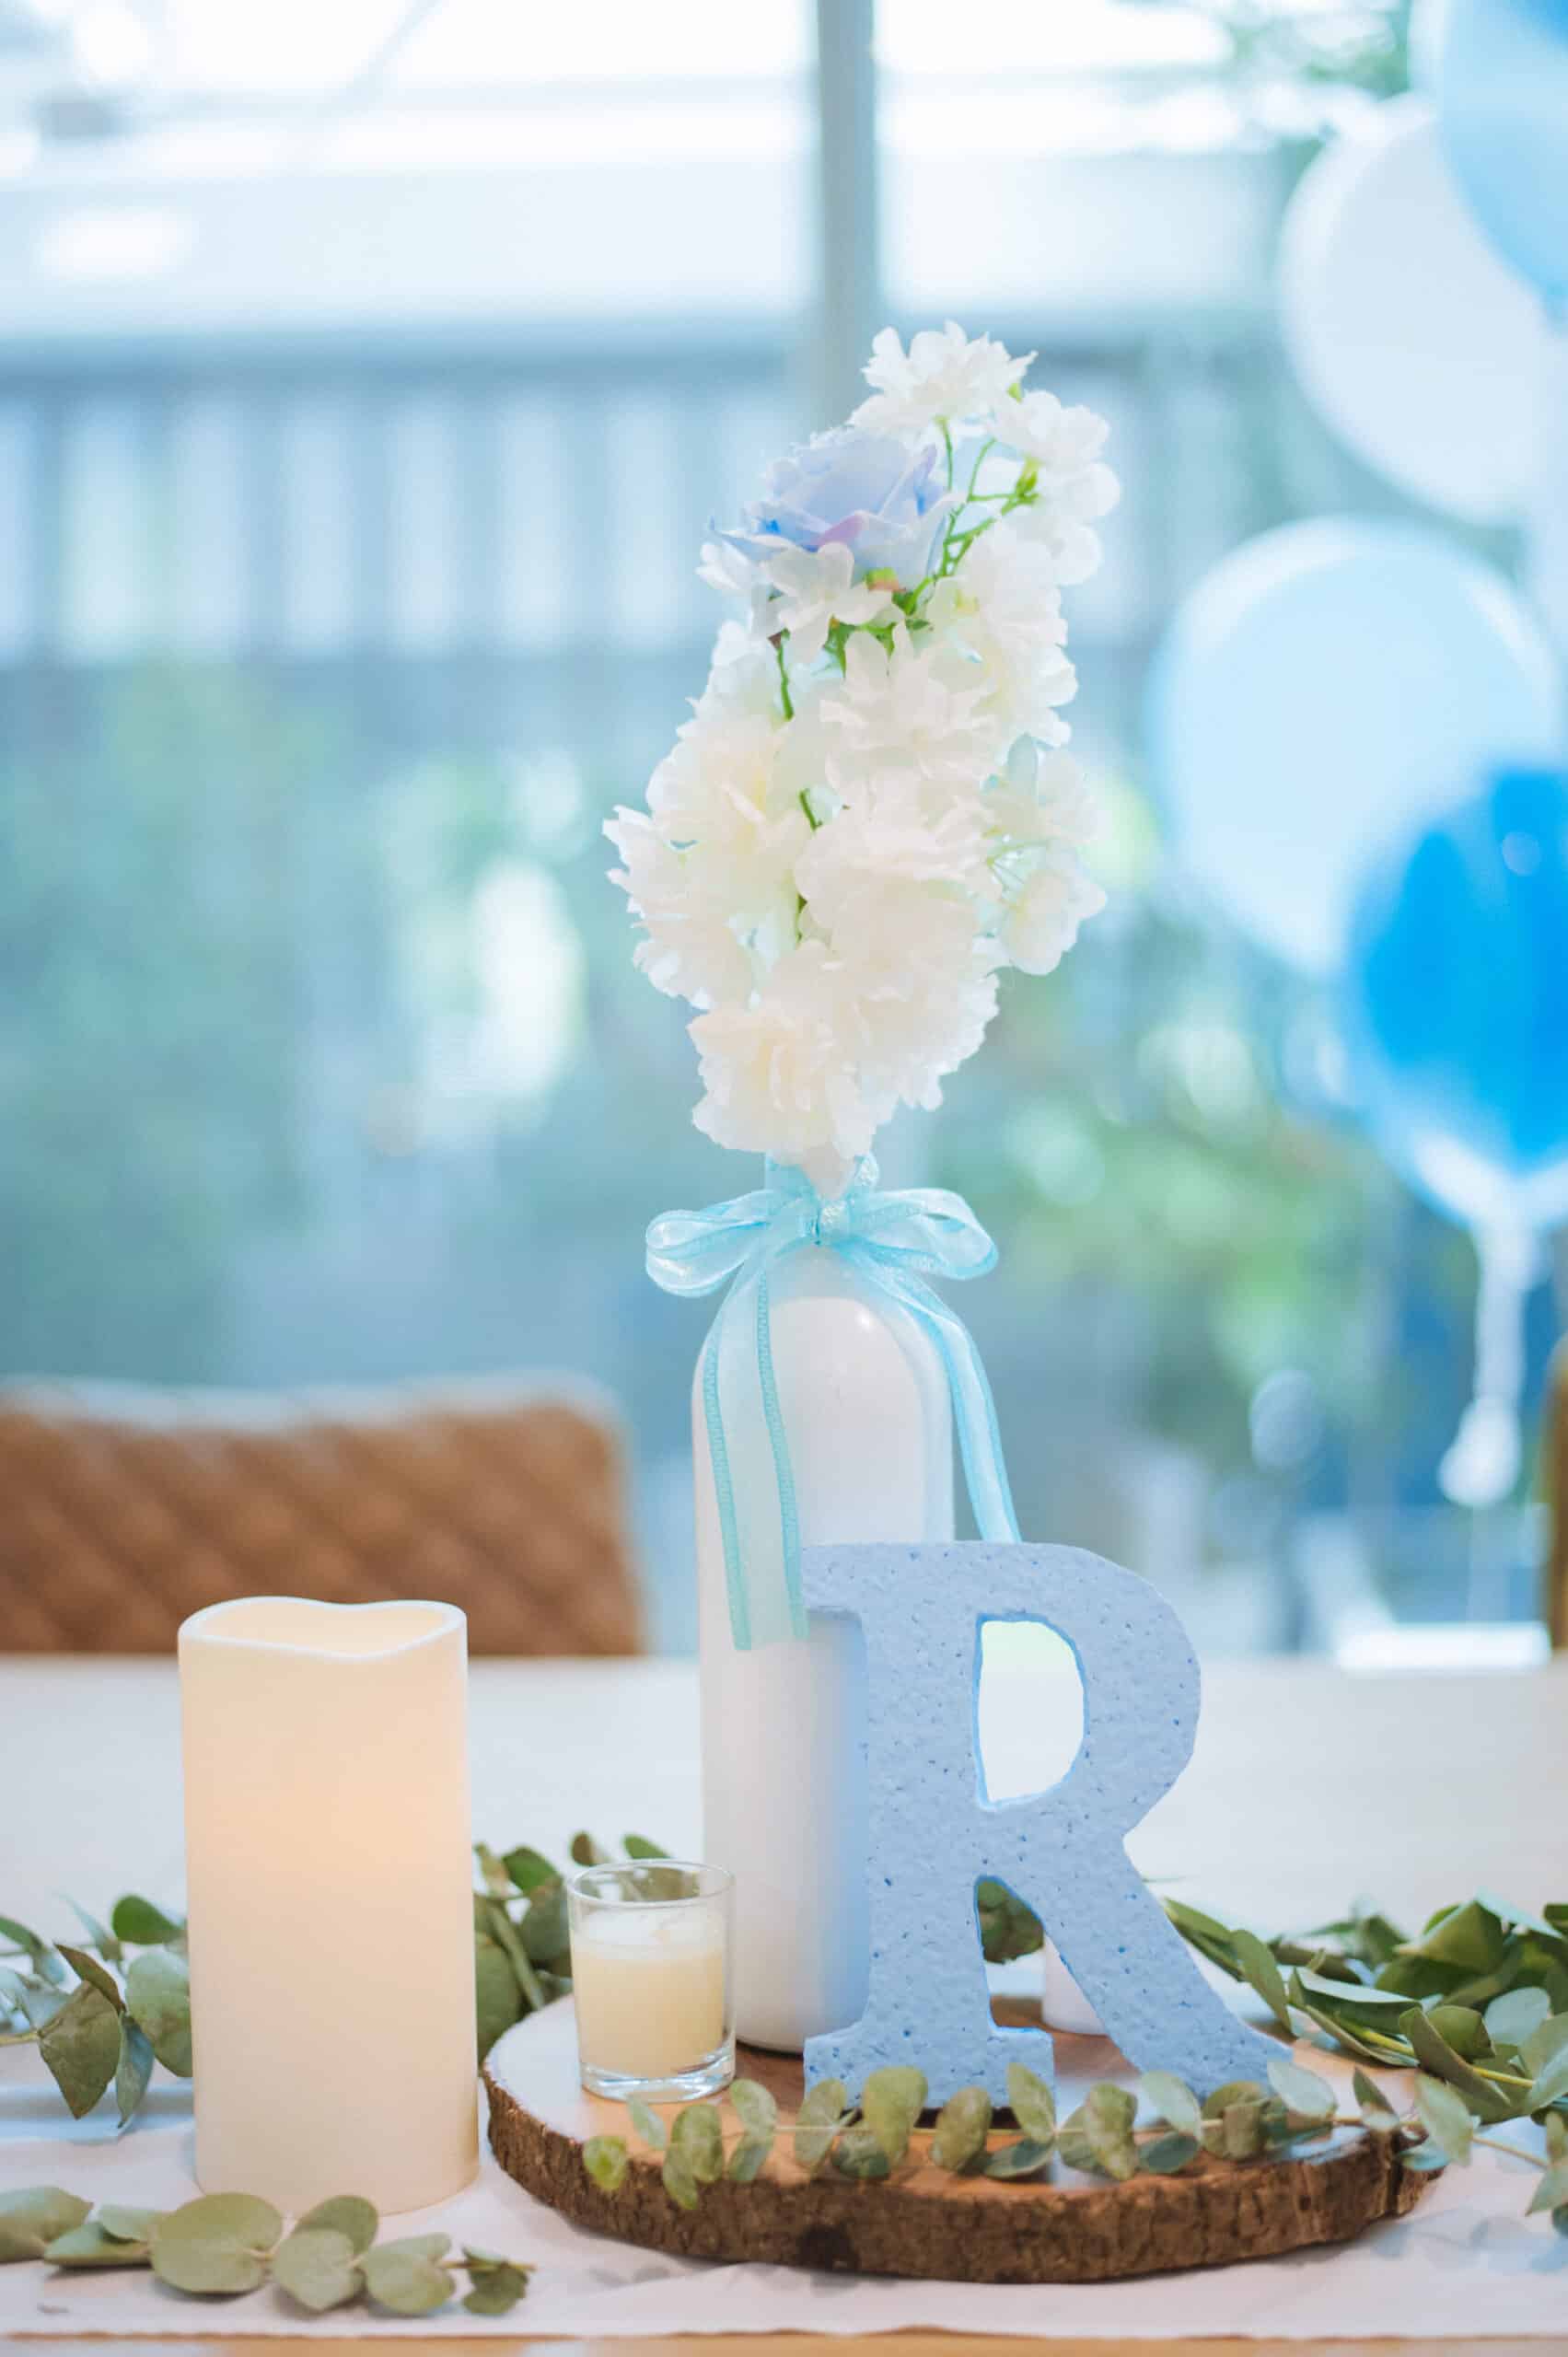 Birthday party in blue theme color for baby boys, decorations, balloons, backdrop, photobooth, table setting